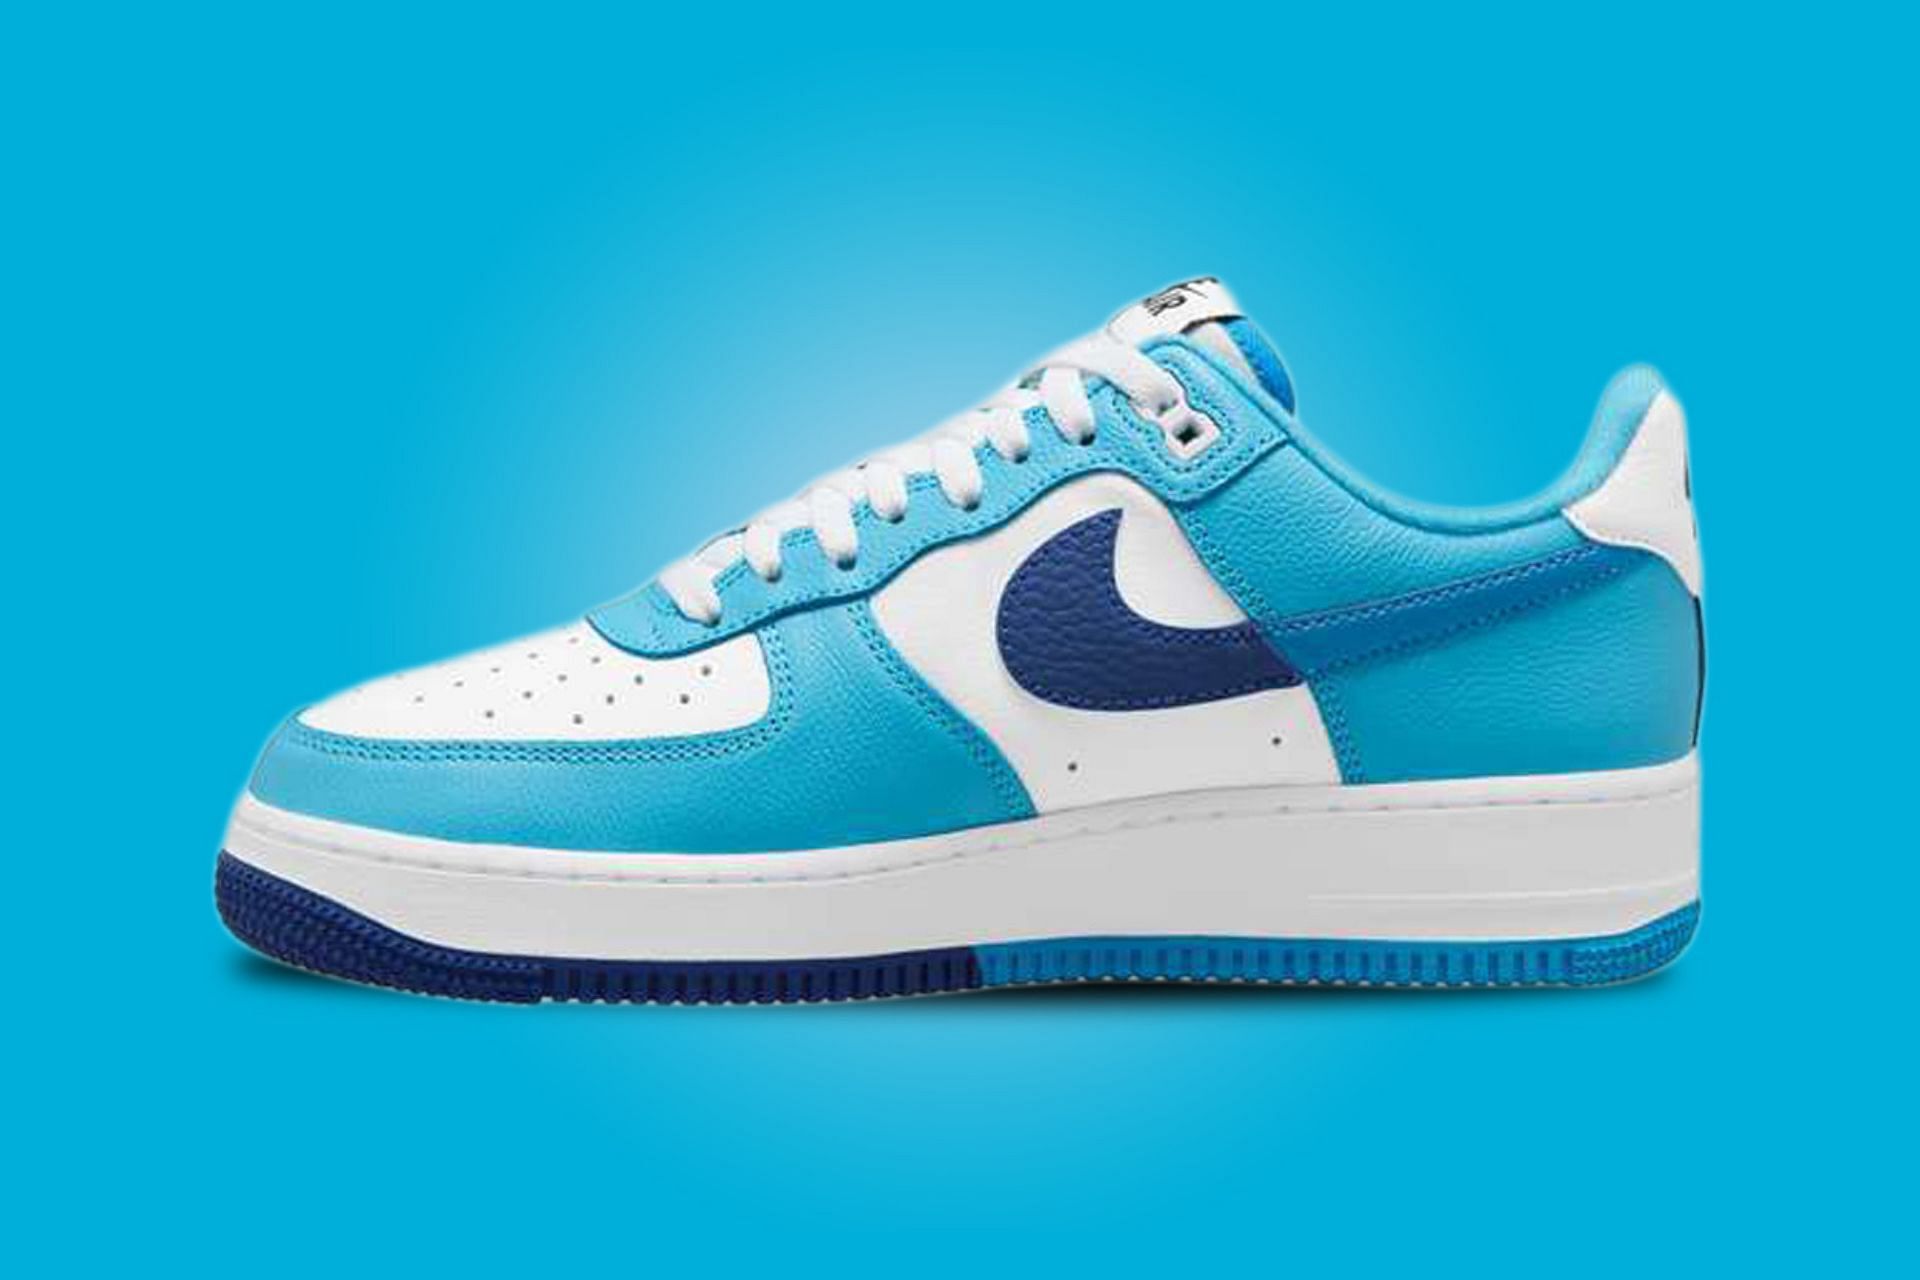 Nike Air Force 1 Low Split "Light Photo Blue Deep Royal Blue" shoes: Where buy, price, and more details explored